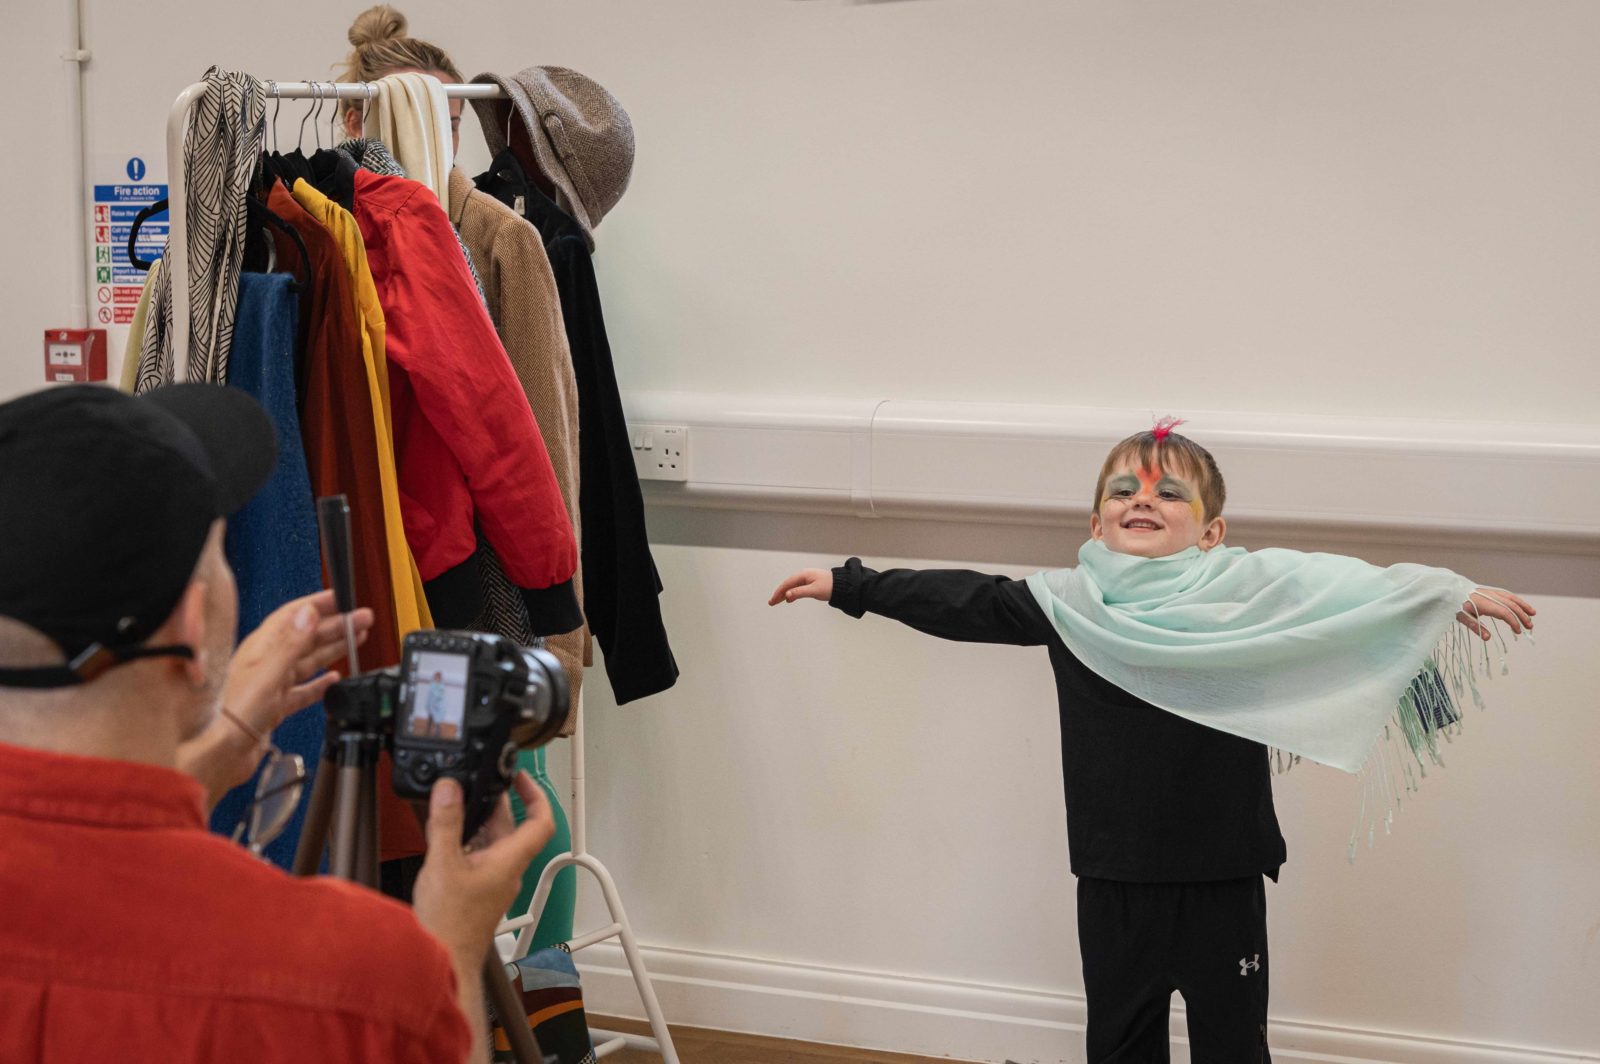 A little boy with blue and red make up on his face, a red feather on his head and a light blue scarf draped over his shoulders smiles at the camera with his arms spread out like wings as Paul takes his photo next to a clothes rail.